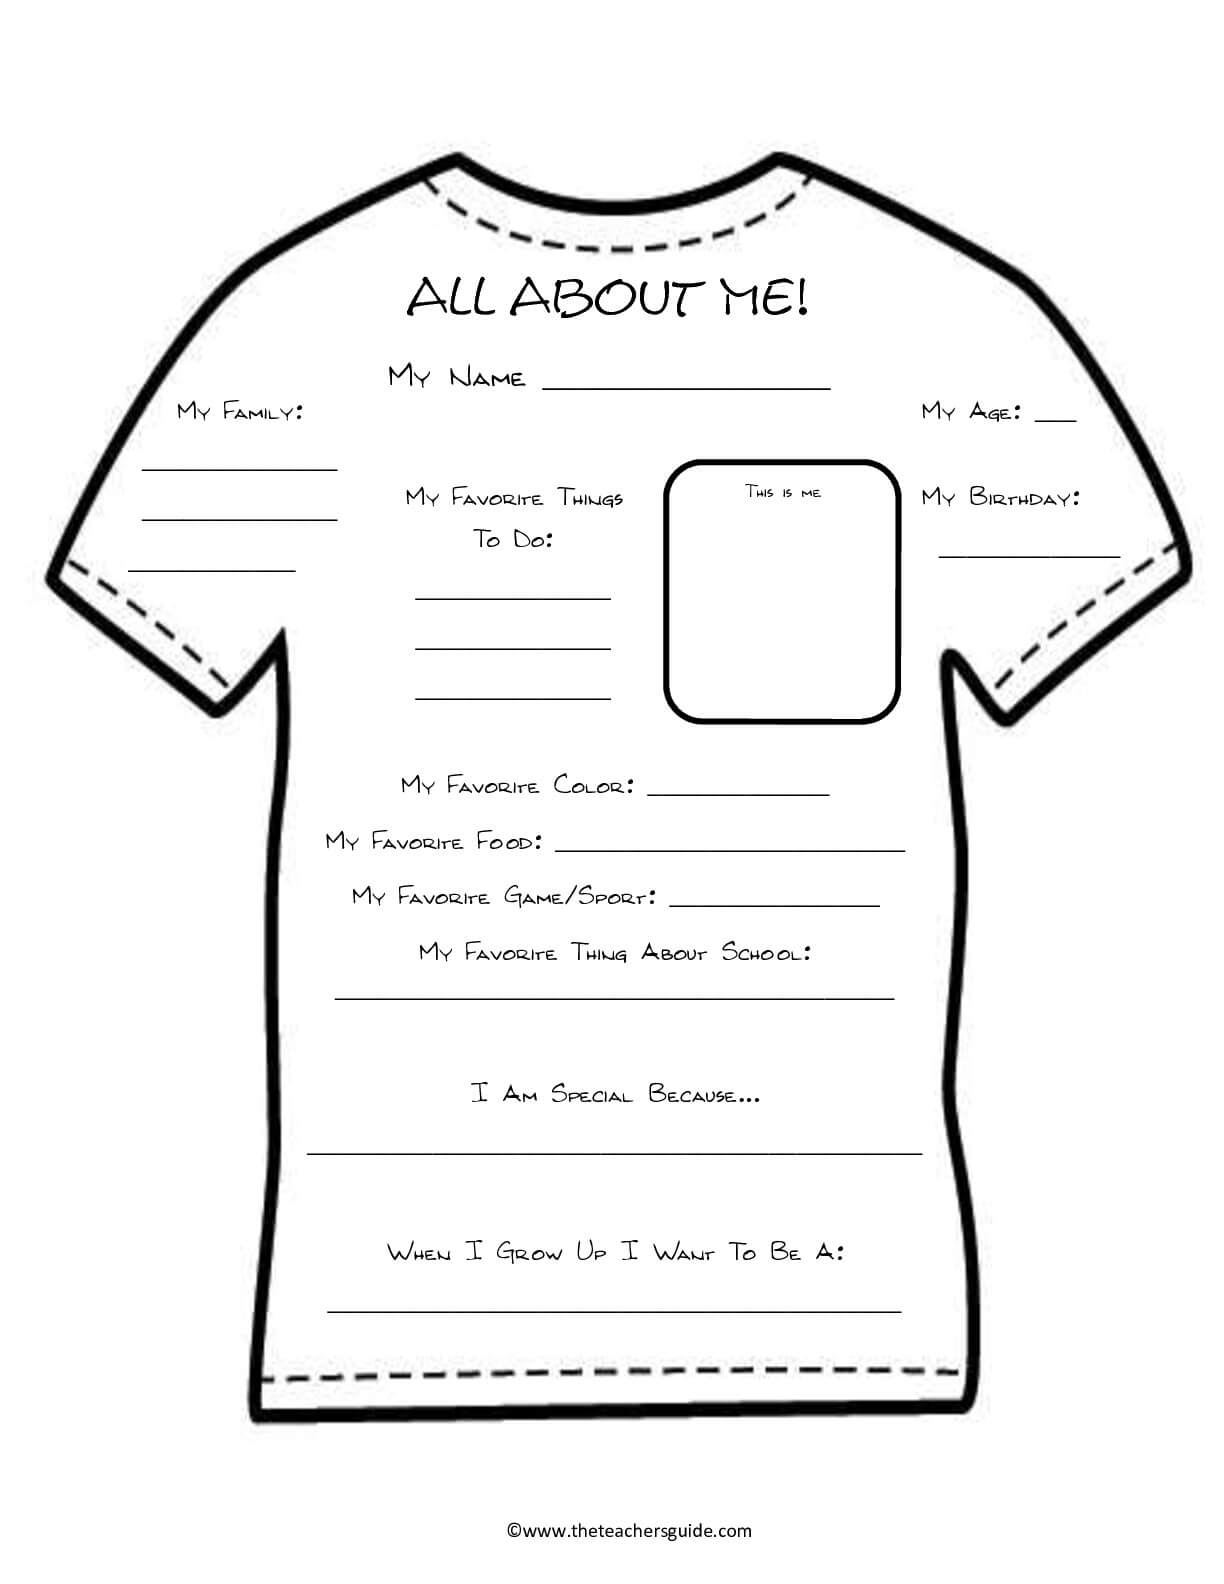 33 Pedagogic 'all About Me' Worksheets | Kittybabylove With Regard To All About Me Book Template